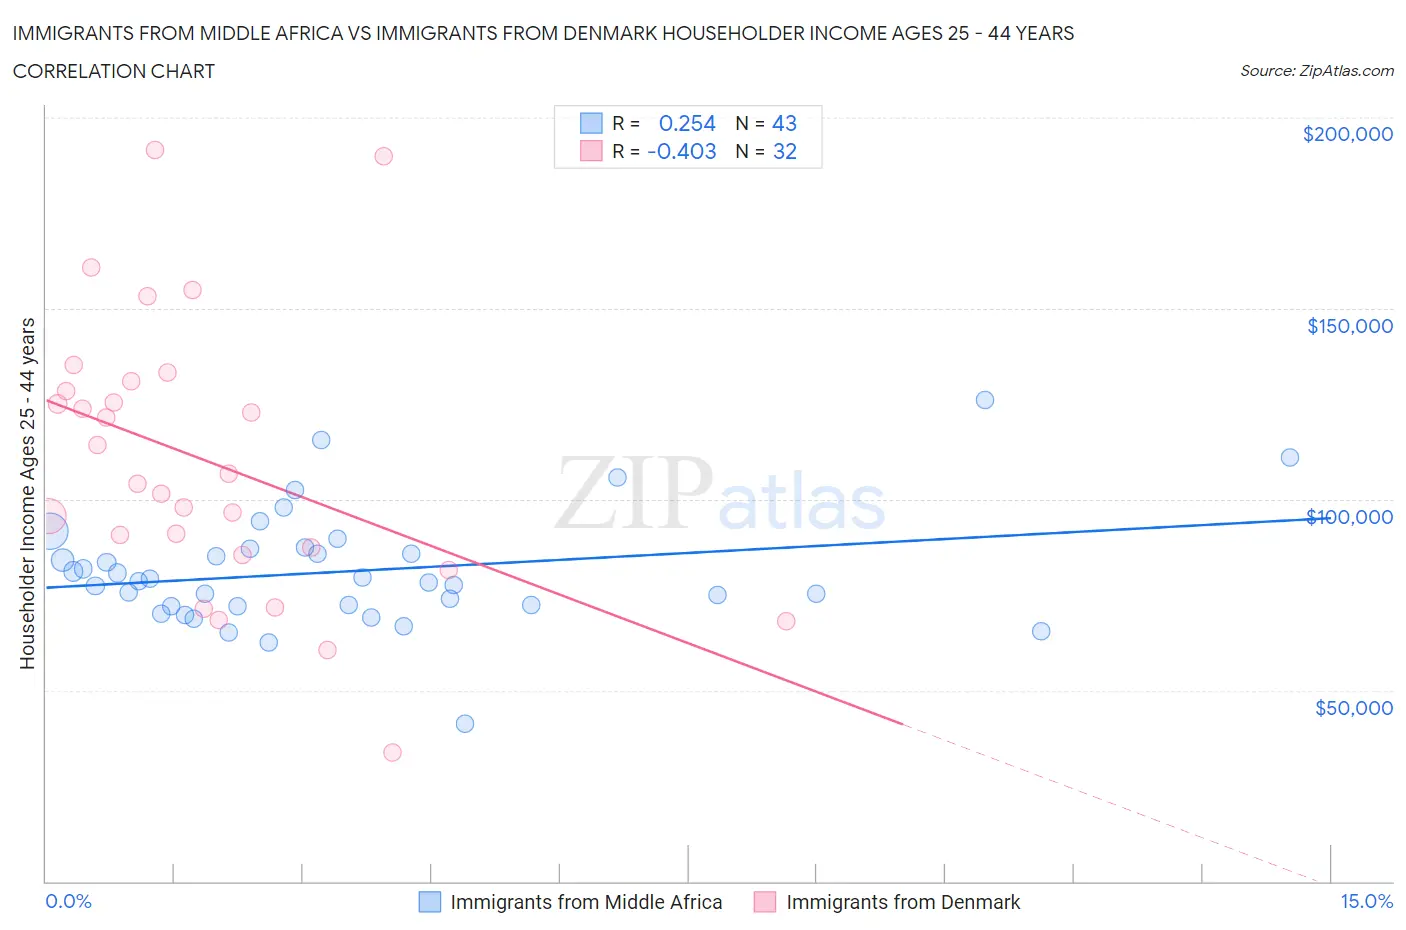 Immigrants from Middle Africa vs Immigrants from Denmark Householder Income Ages 25 - 44 years